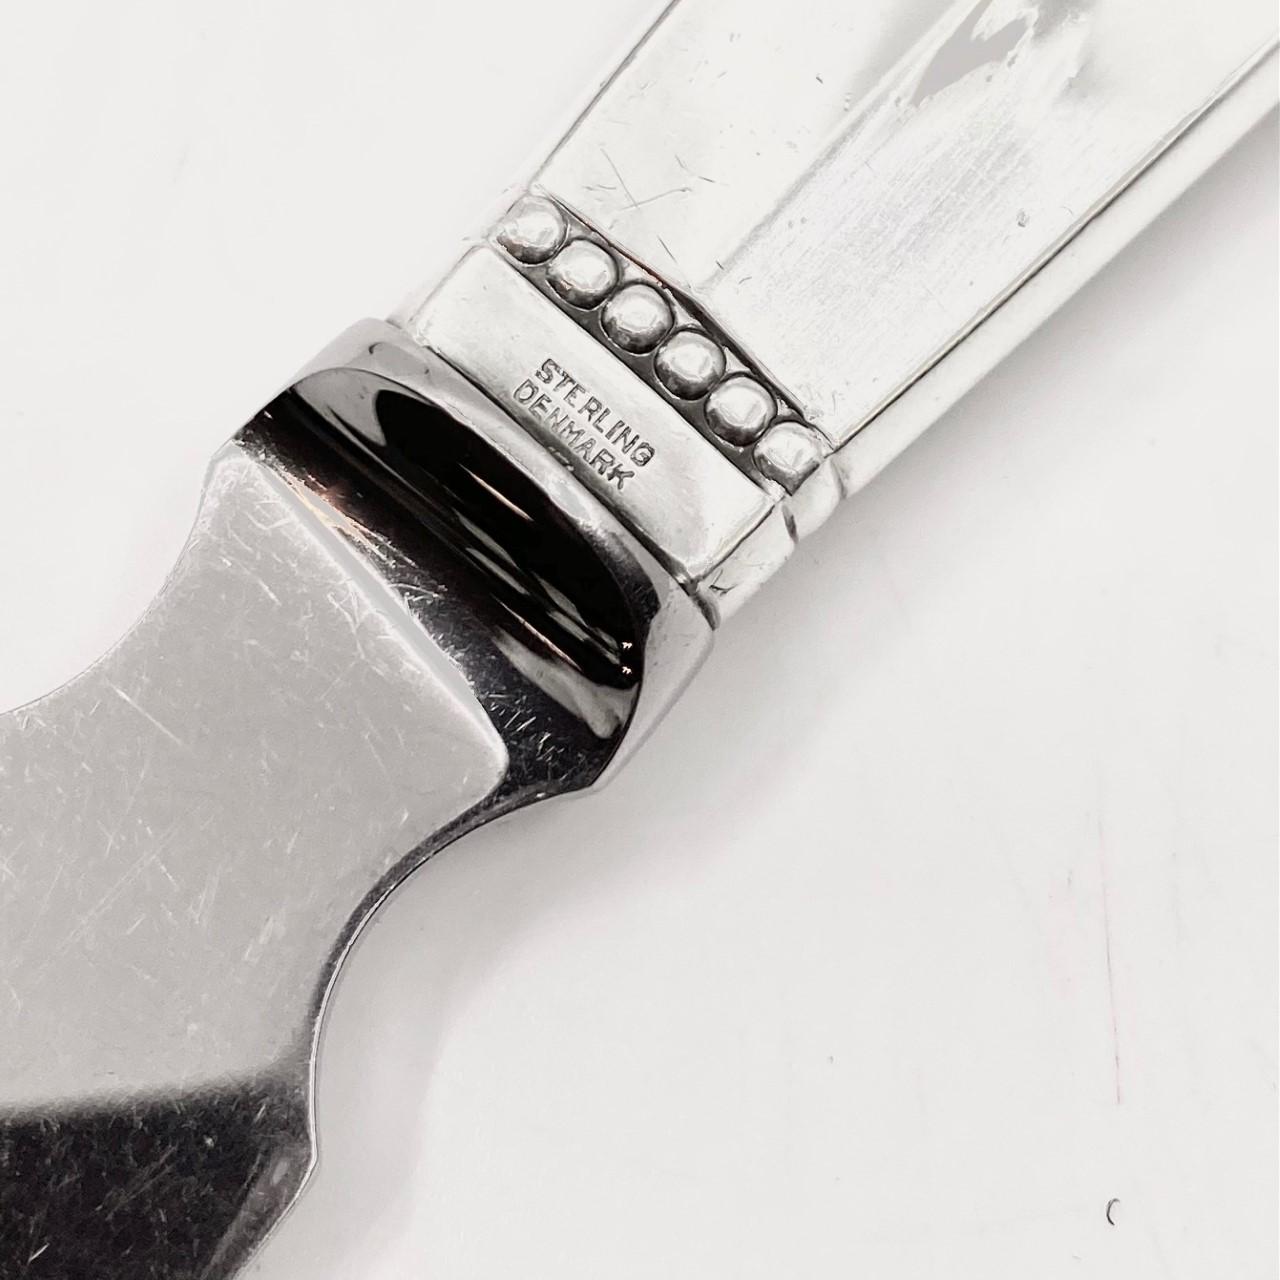 Sterling silver handle and stainless steel (blade) Georg Jensen cake knife, item #196 in the Acanthus pattern, design #180 by Johan Rohde from 1917.

Georg Jensen changed the design of the blade in the 1930’s, this is the old type blade.

Additional